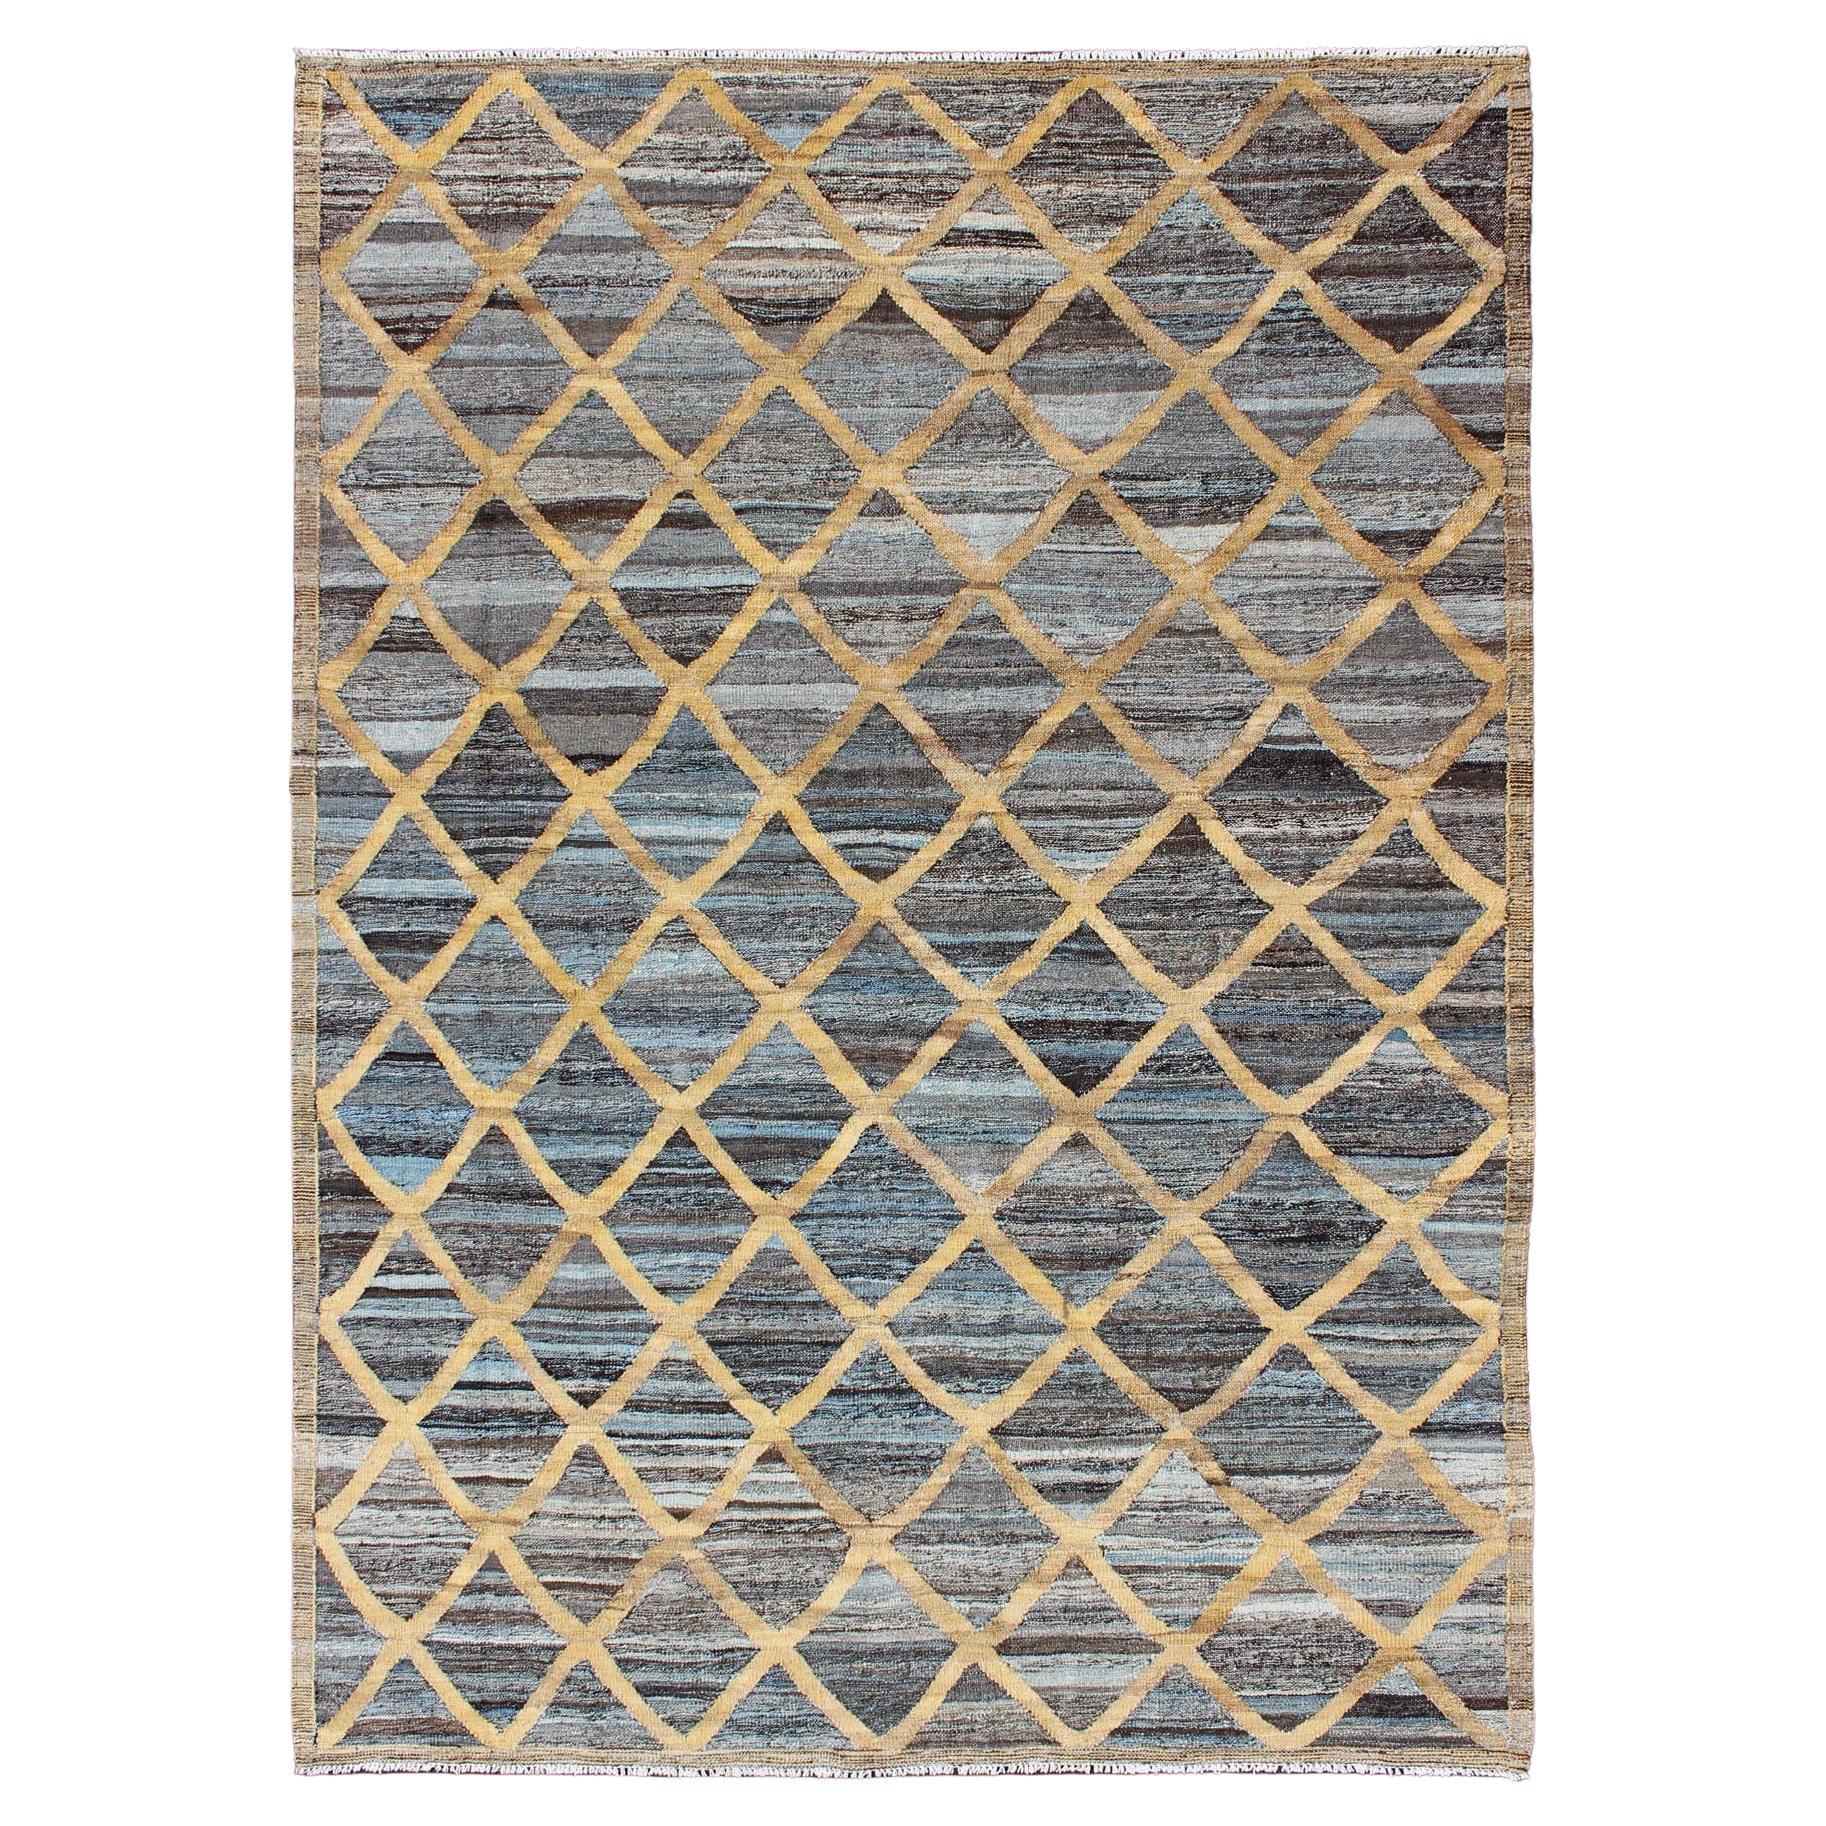 Keivan Woven Arts Flat-Weave Kilim in Diamond Gold Design With Blue and Charcoal For Sale